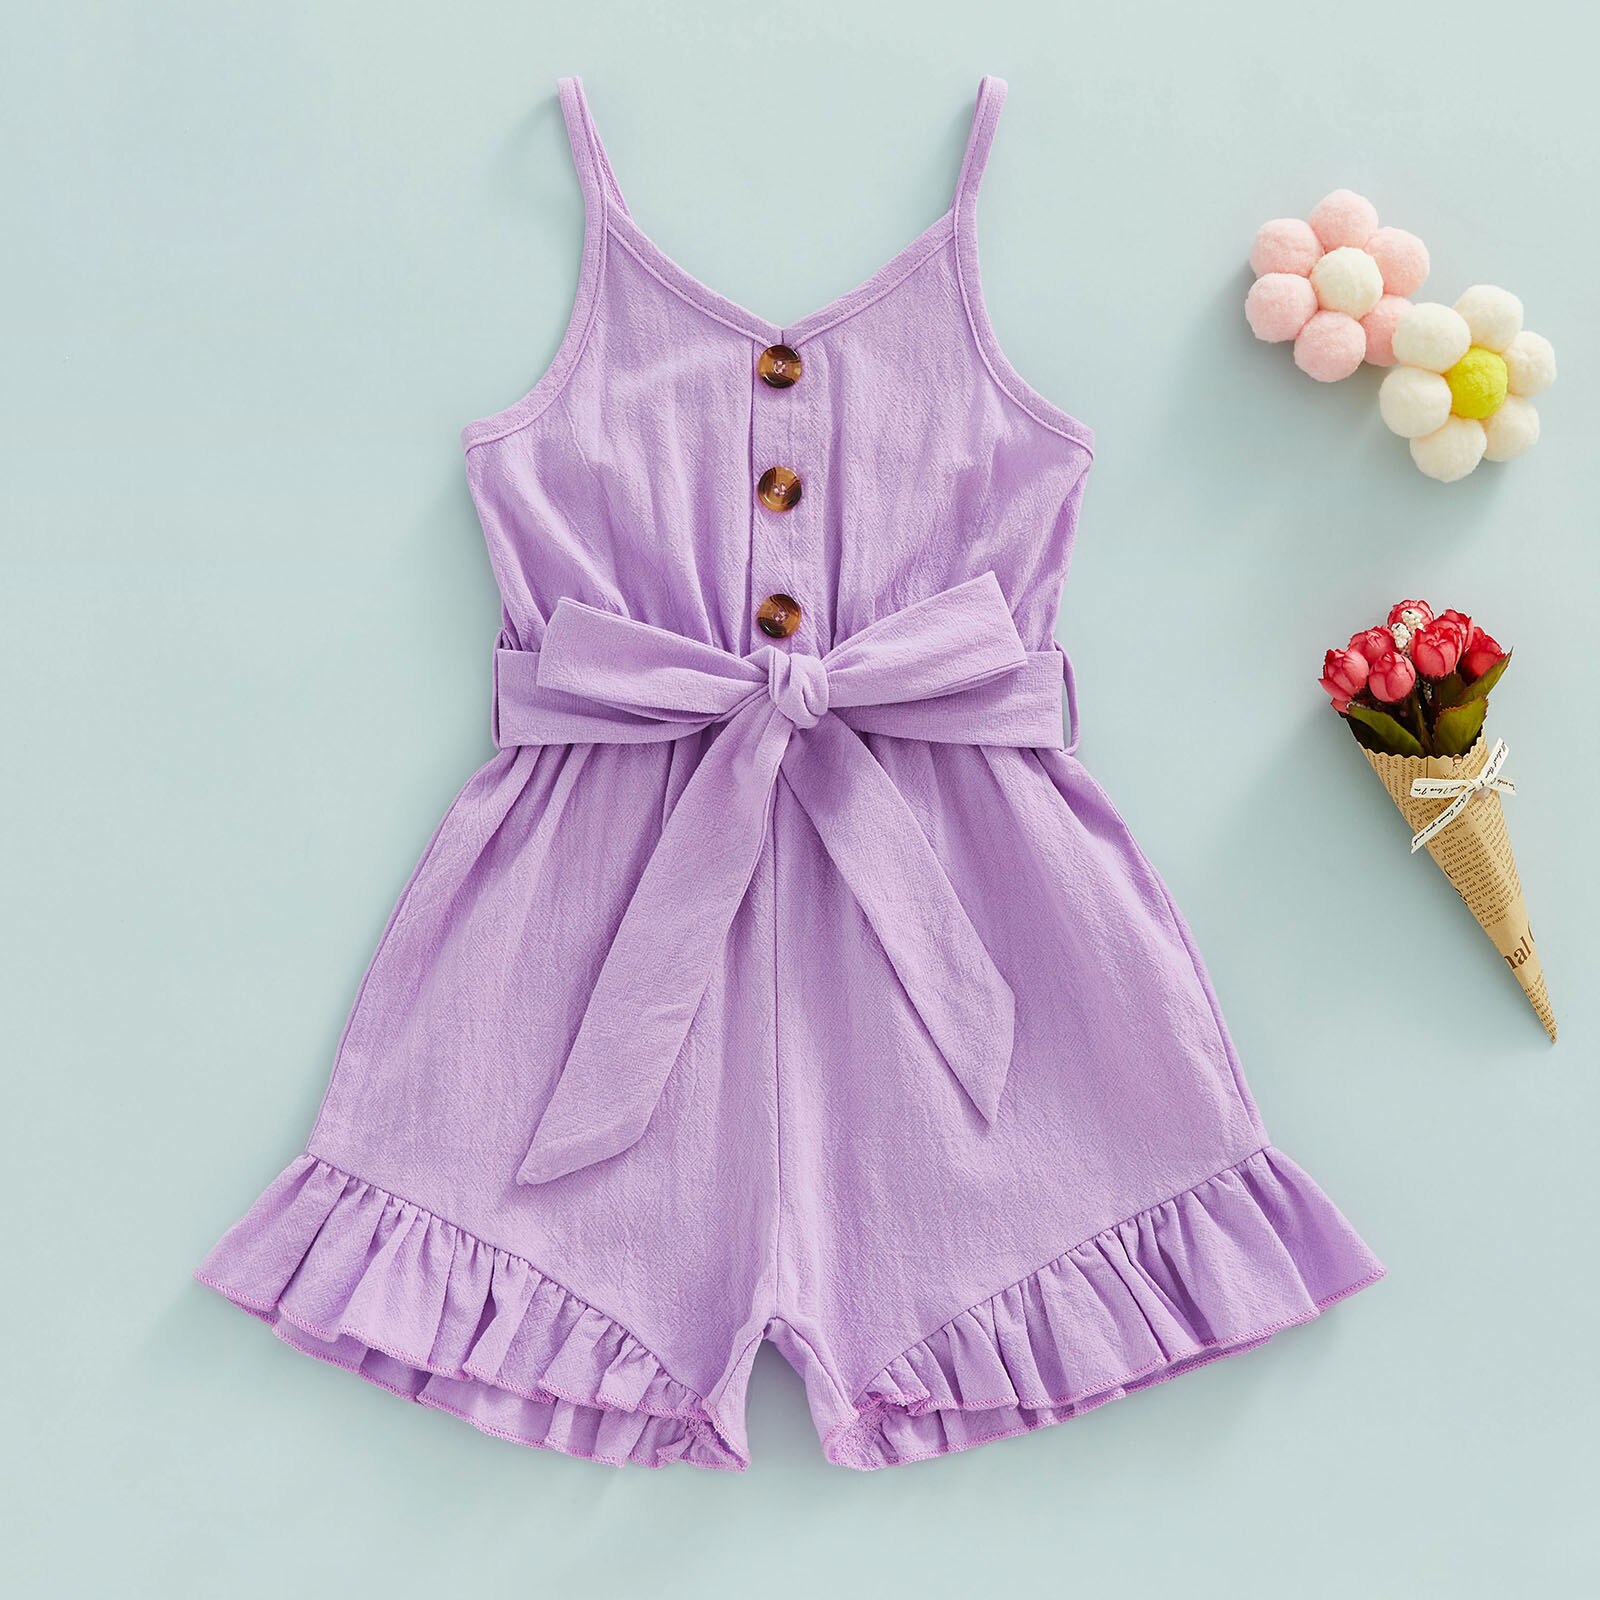 Toddler-Kid-Baby-Girls-Sling-Playsuit-Spaghetti-Straps-V-Neck-Buttons-Sleeveless-Ruffle-Hem-Solid-Color-1